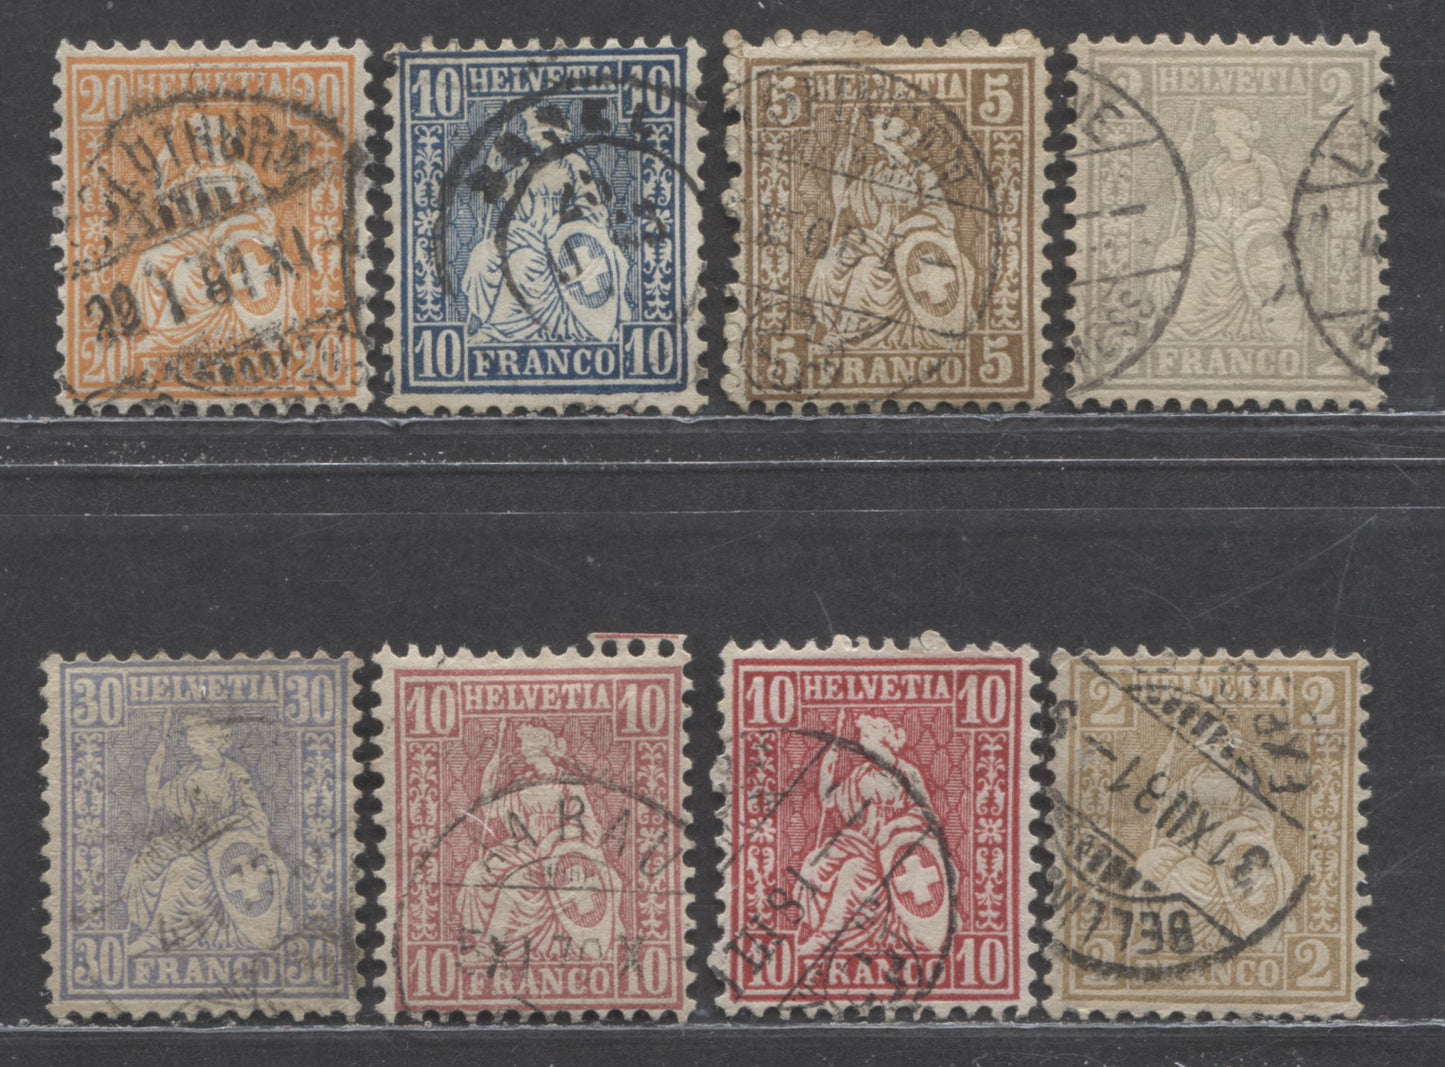 Lot 270 Switzerland SC#41/56 1862-1864 Helvetia Issue, White Papers, 8 Fine/Very Fine Used Singles, Click on Listing to See ALL Pictures, 2022 Scott Classic Cat. $32.45 USD